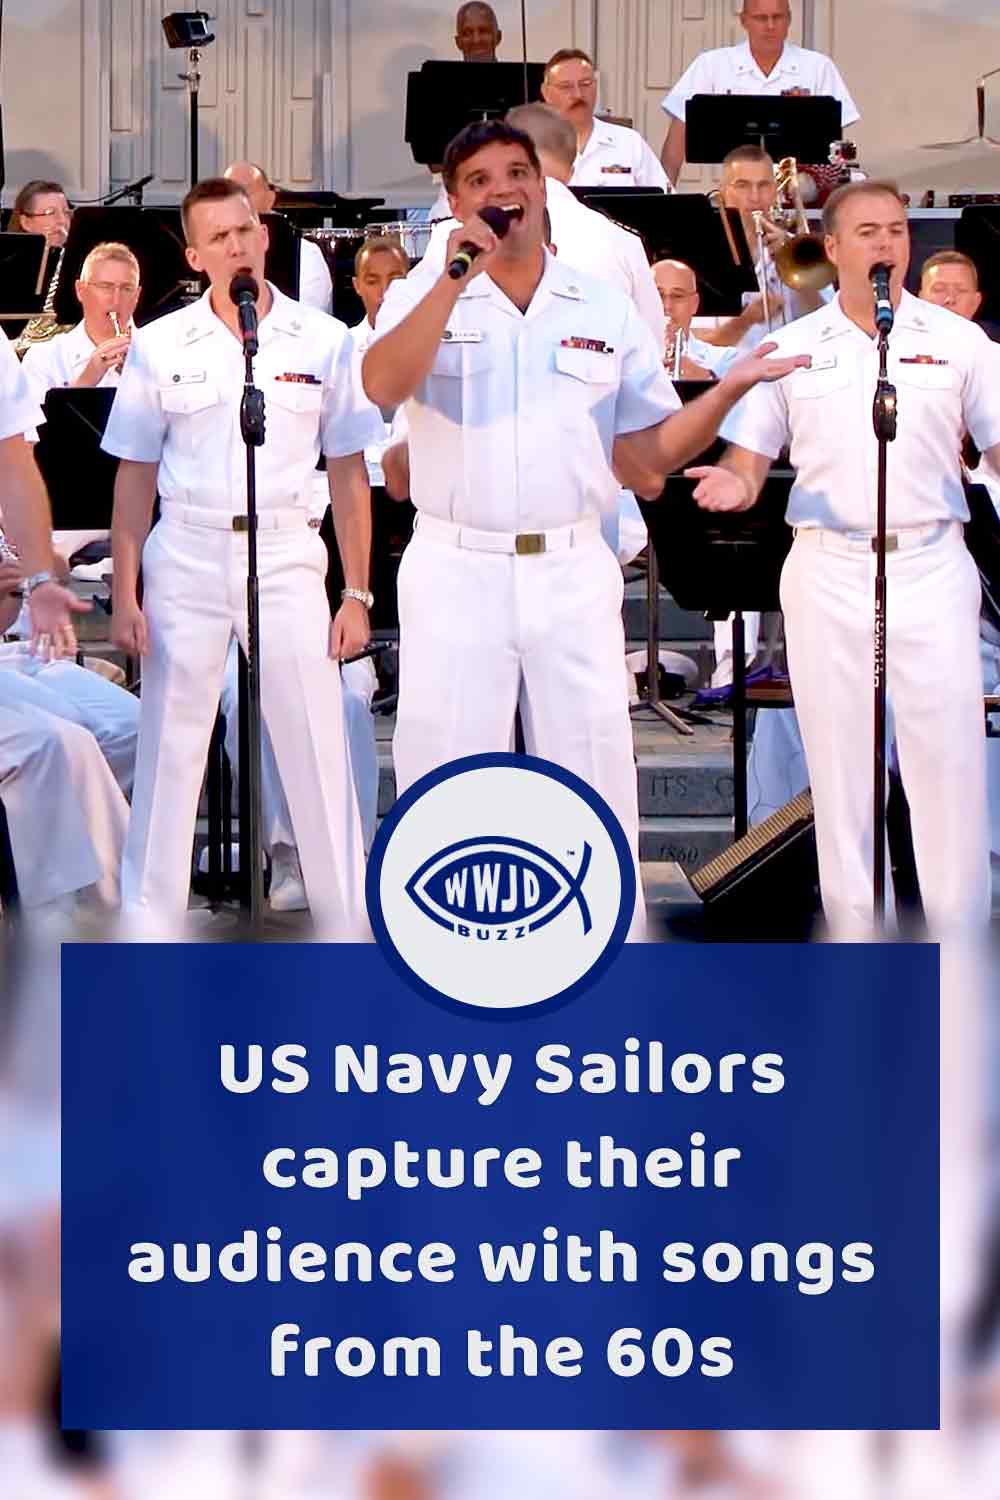 US Navy Sailors capture their audience with songs from the 60s